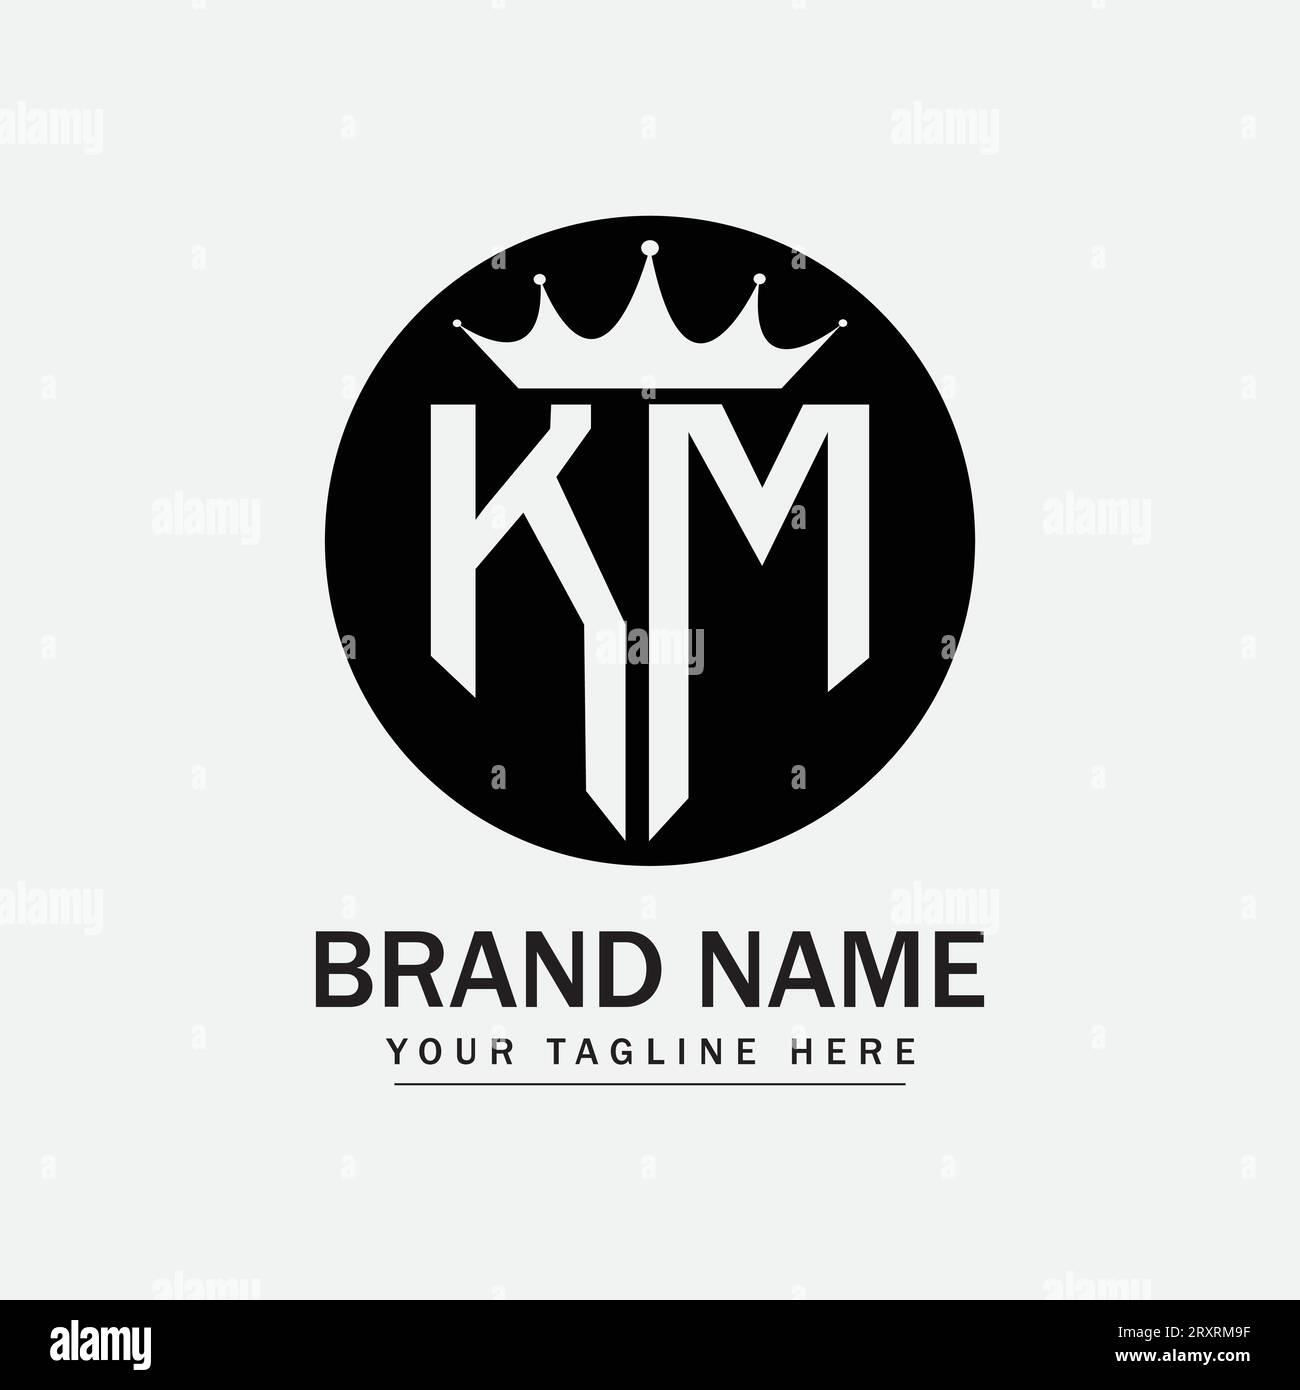 KM logo with vectorize format. company, name, brand Stock Vector